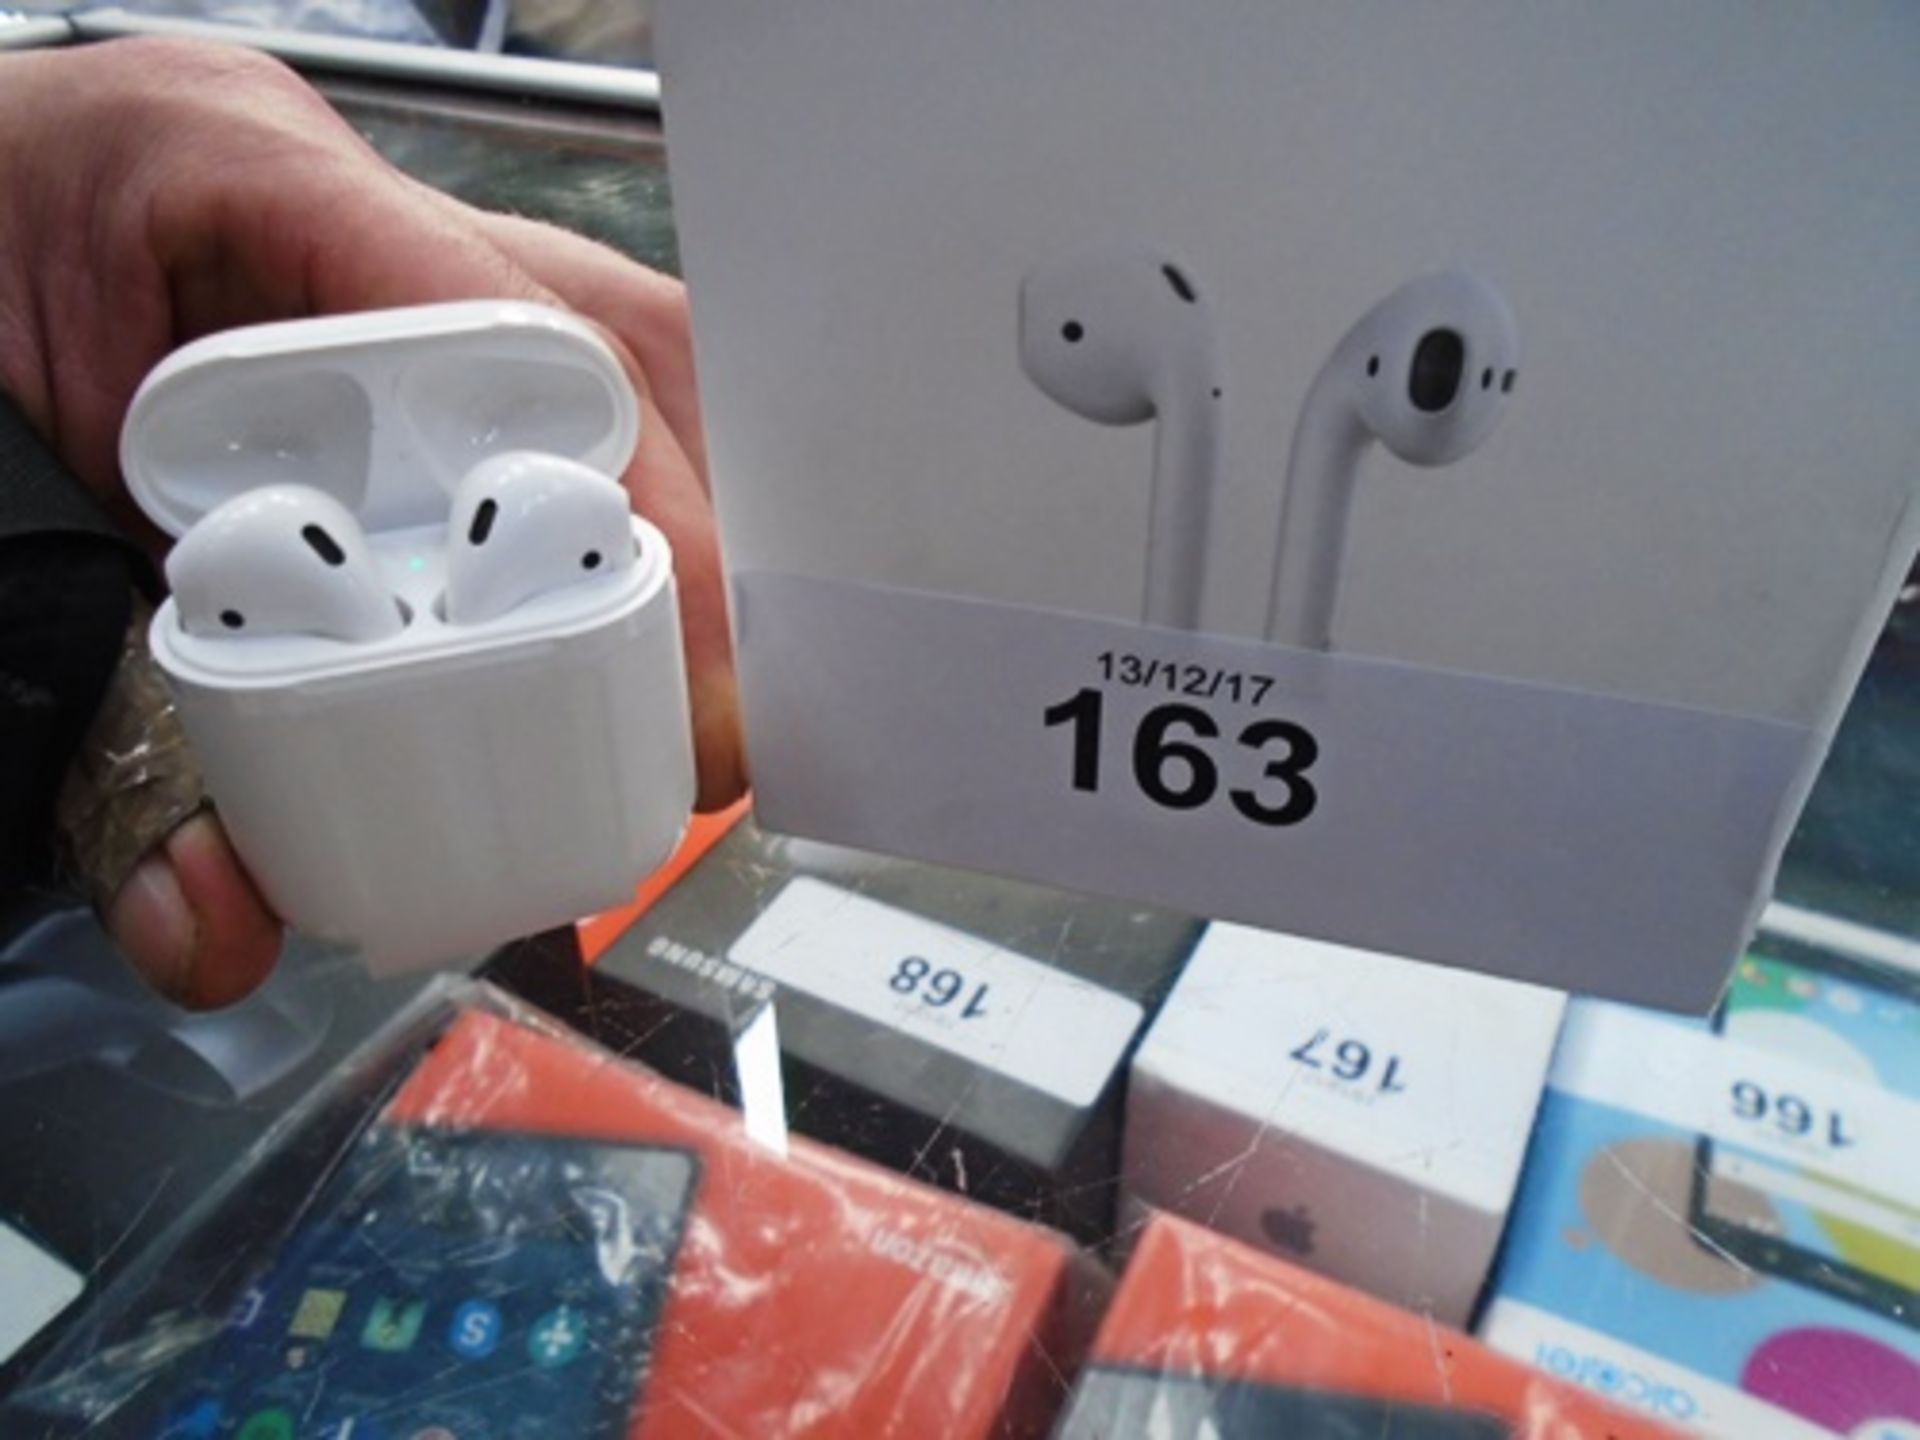 A pair of Apple Airpods headphones, model A1602 - New in box, box open (FC2)